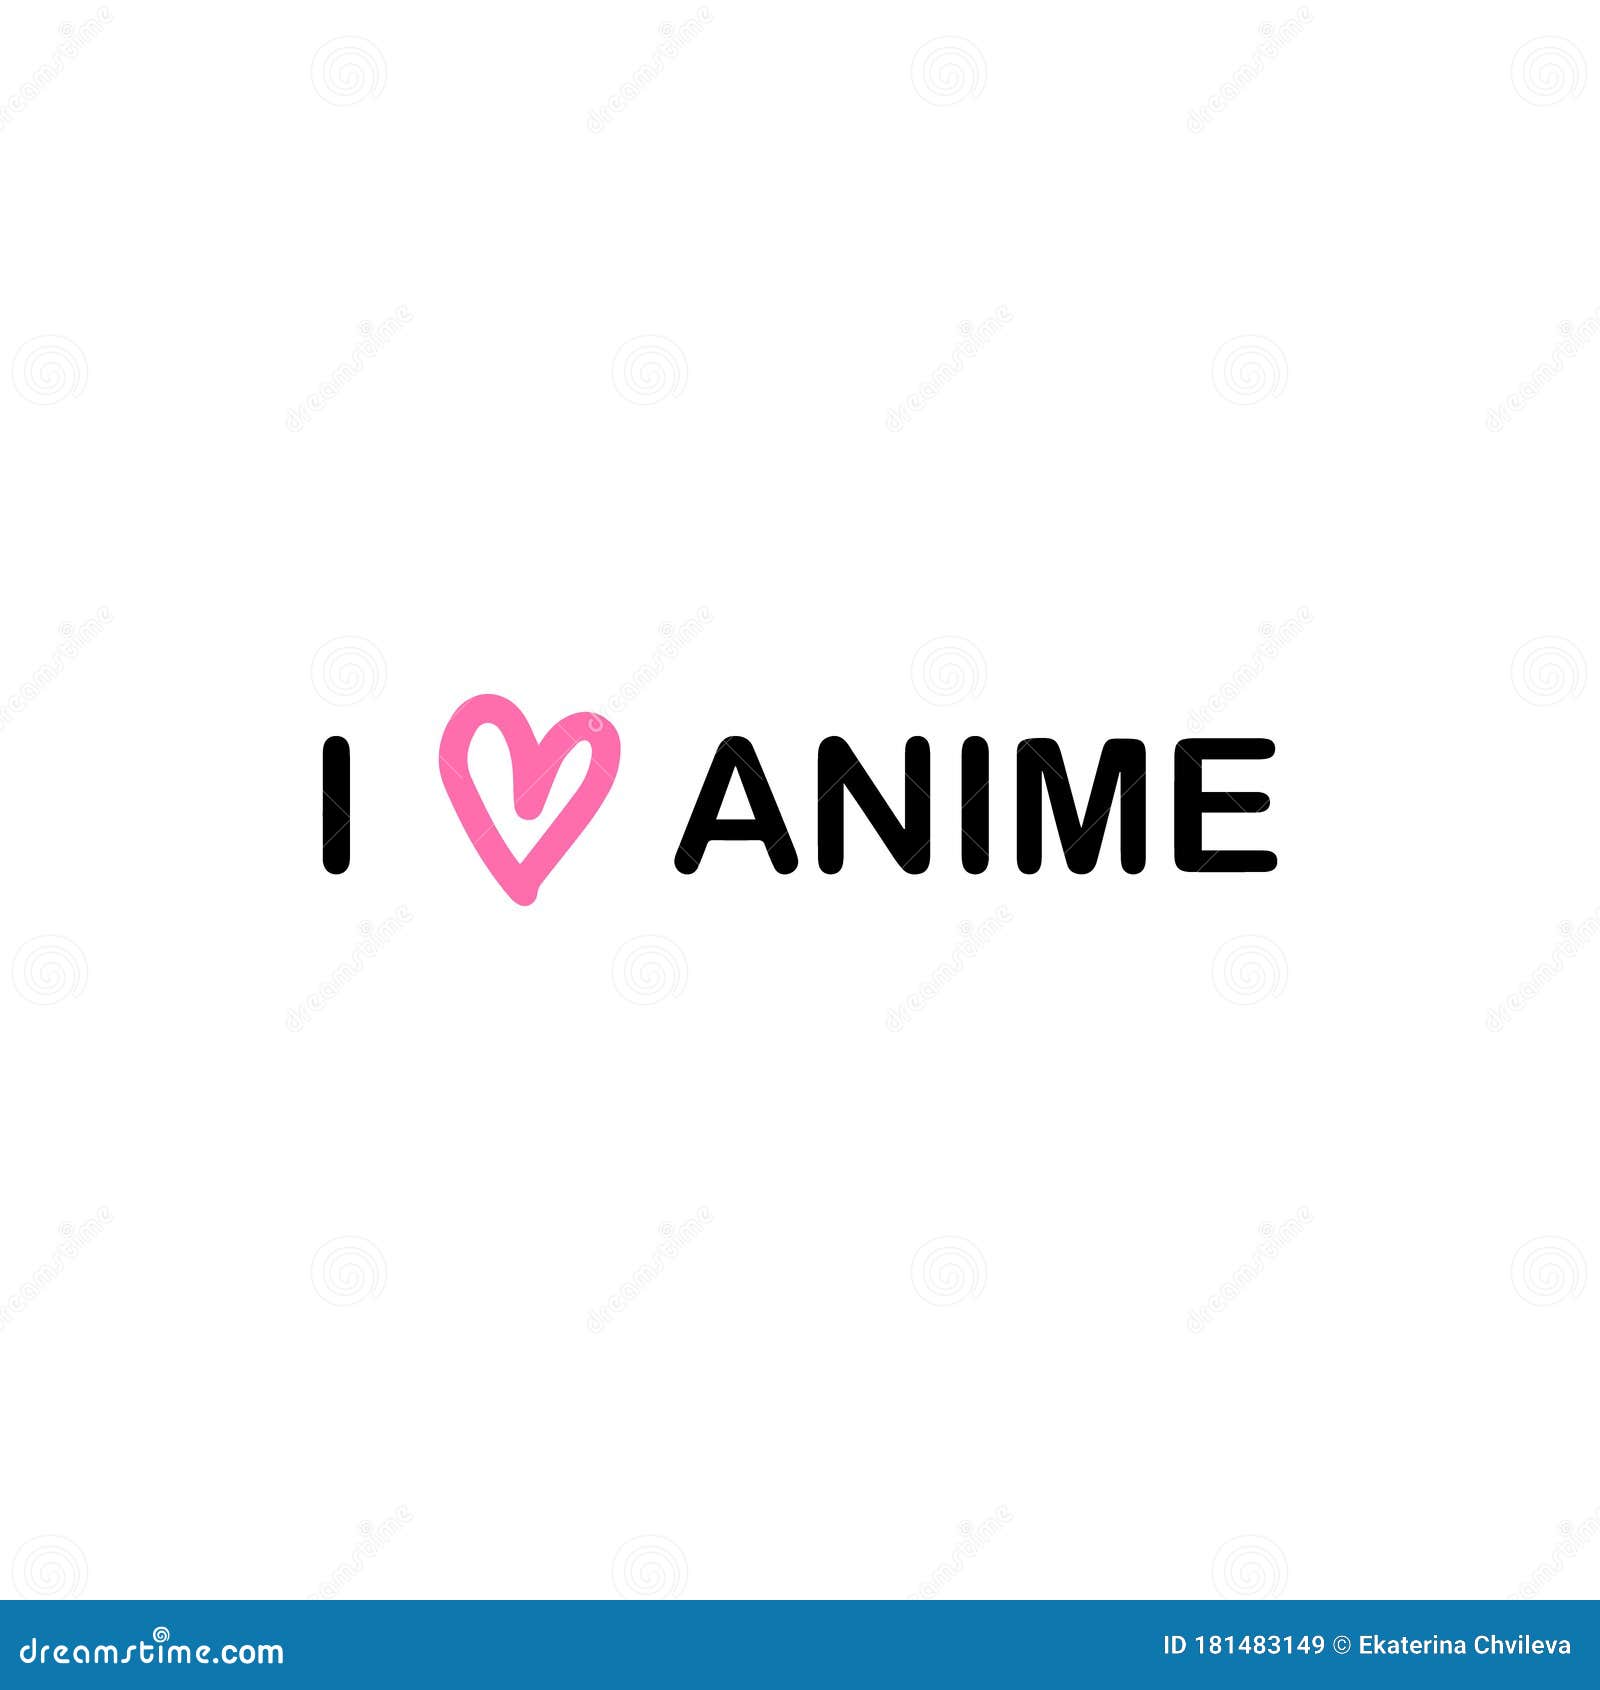 What does the word anime mean? - Quora